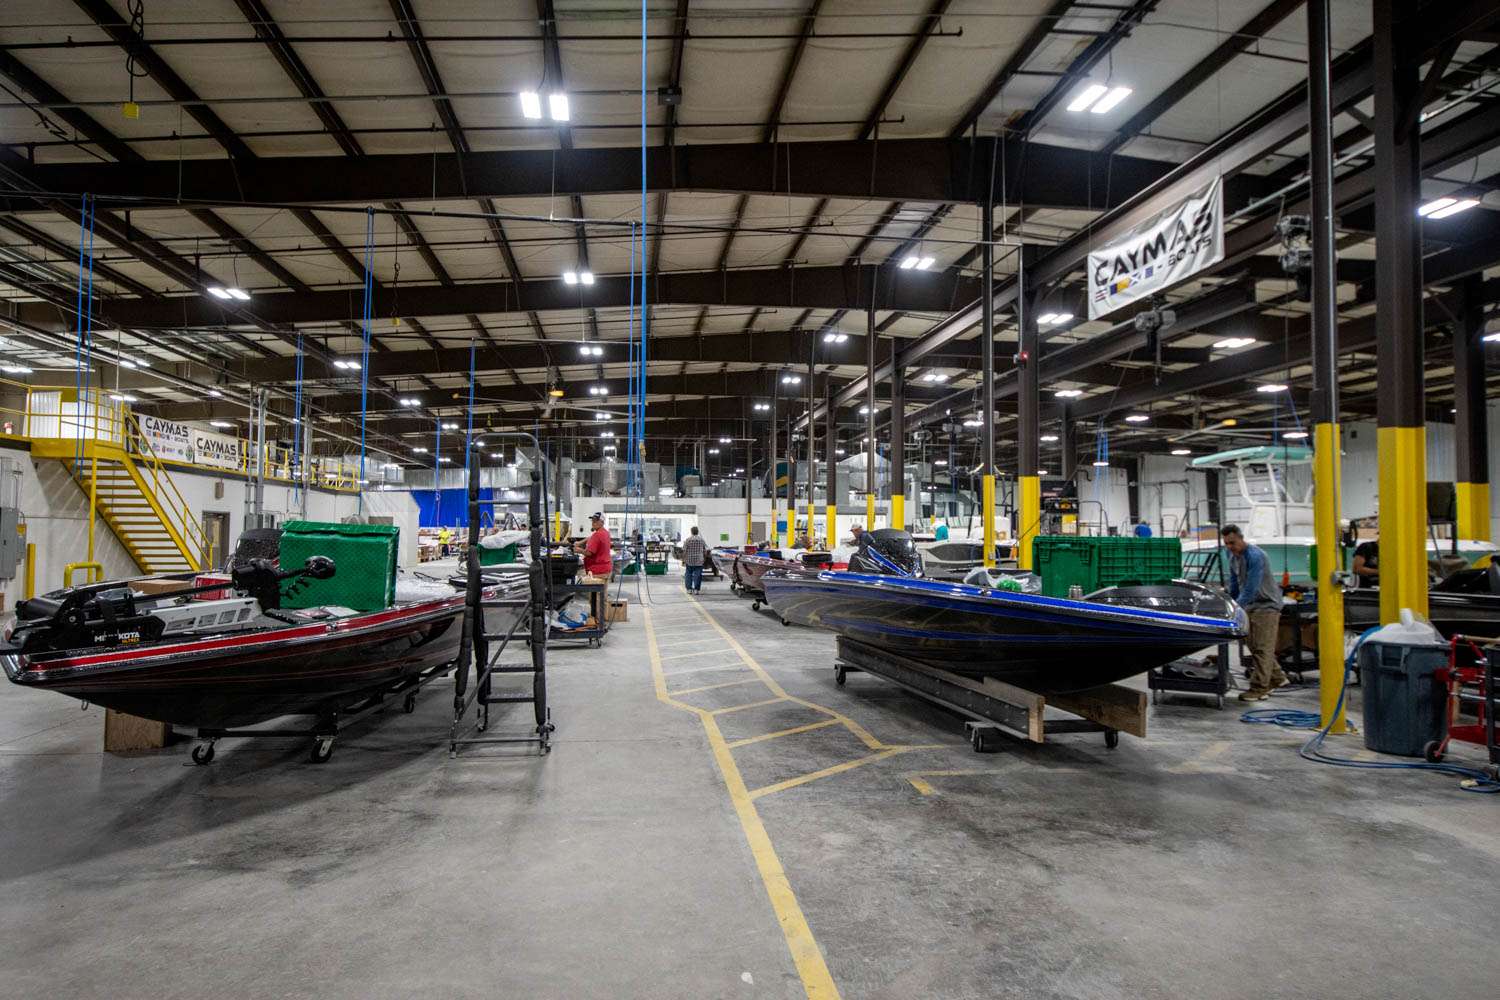 The Caymas production facility is right at 100,000 square feet. They are currently building another 100,000-square-foot facility to expand production.
